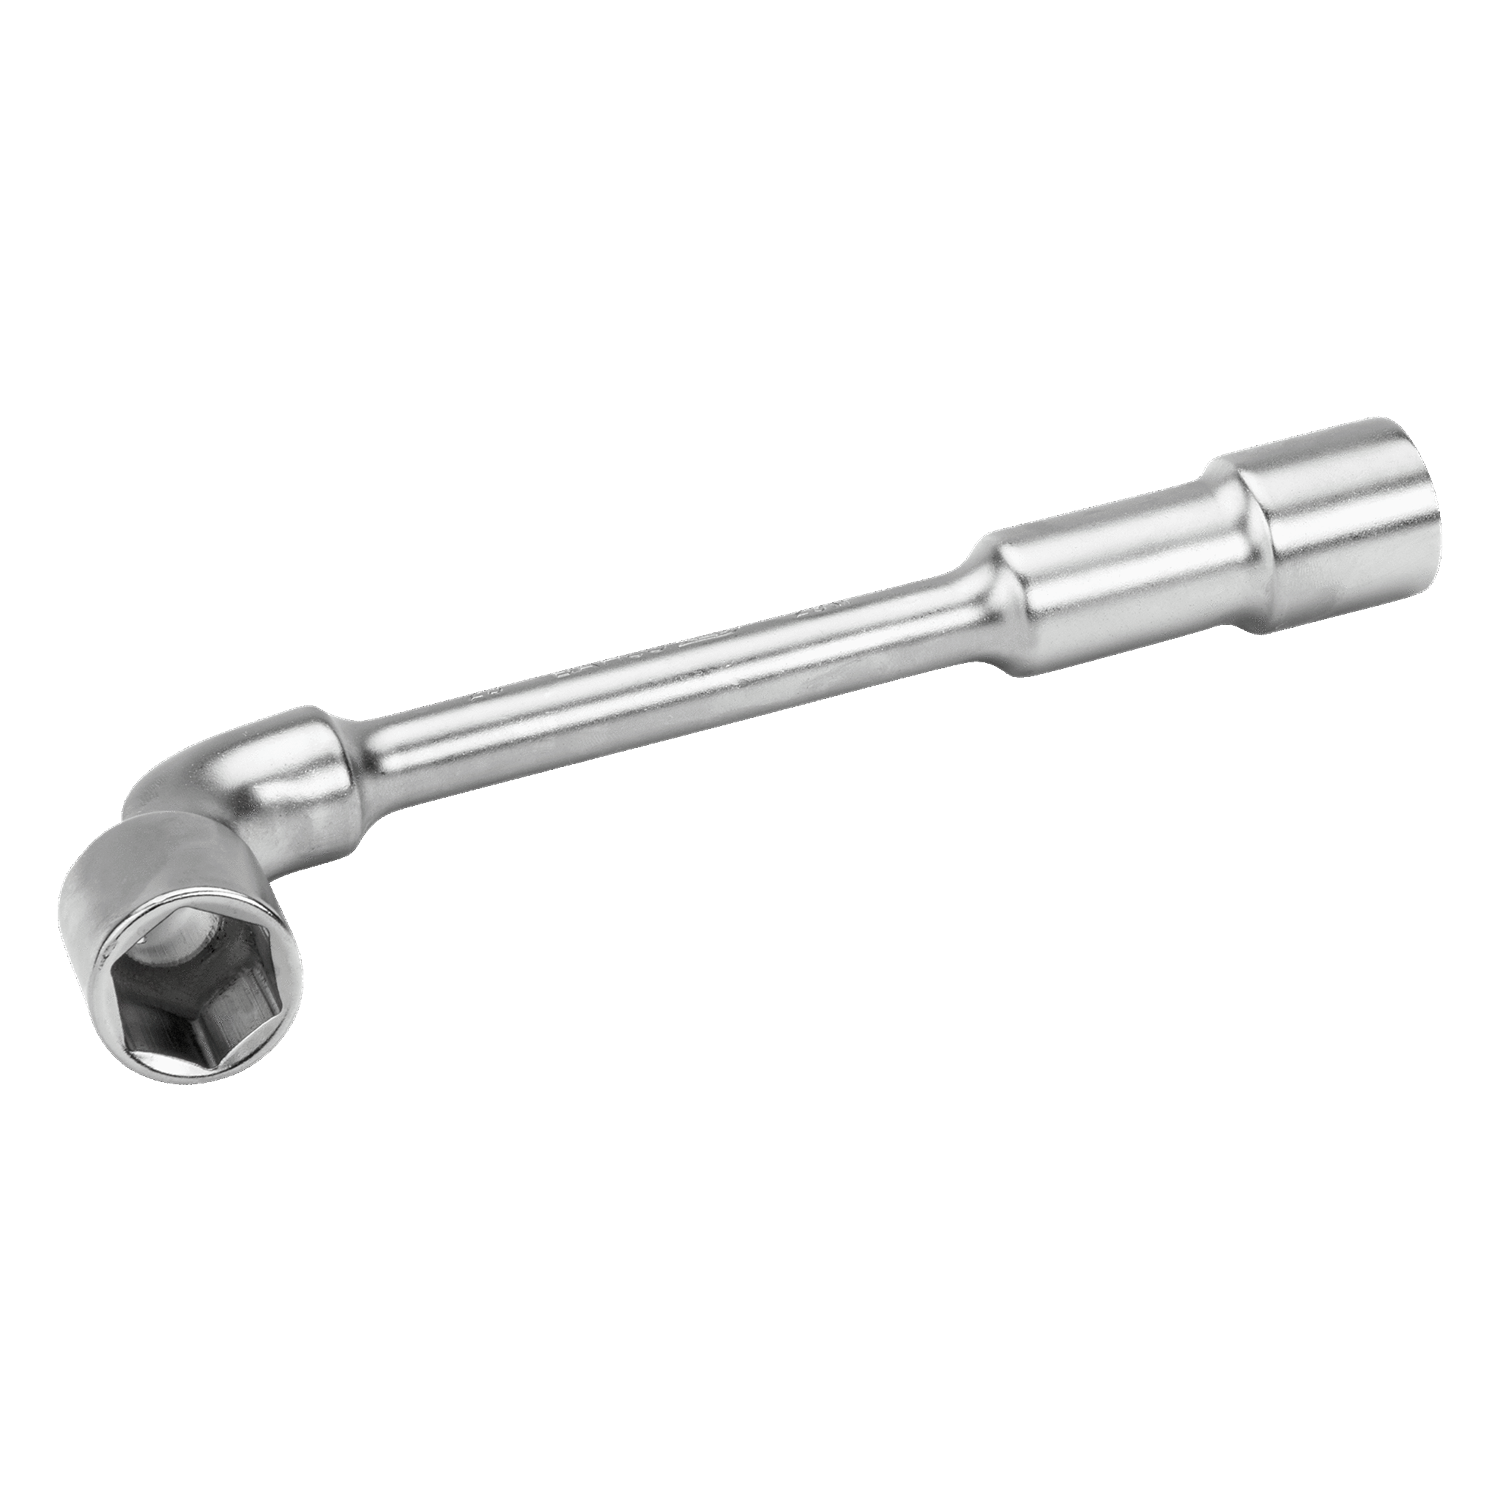 BAHCO 29M Metric Double Head Offset Socket Wrench 6 X 6 - Premium Socket Wrench from BAHCO - Shop now at Yew Aik.